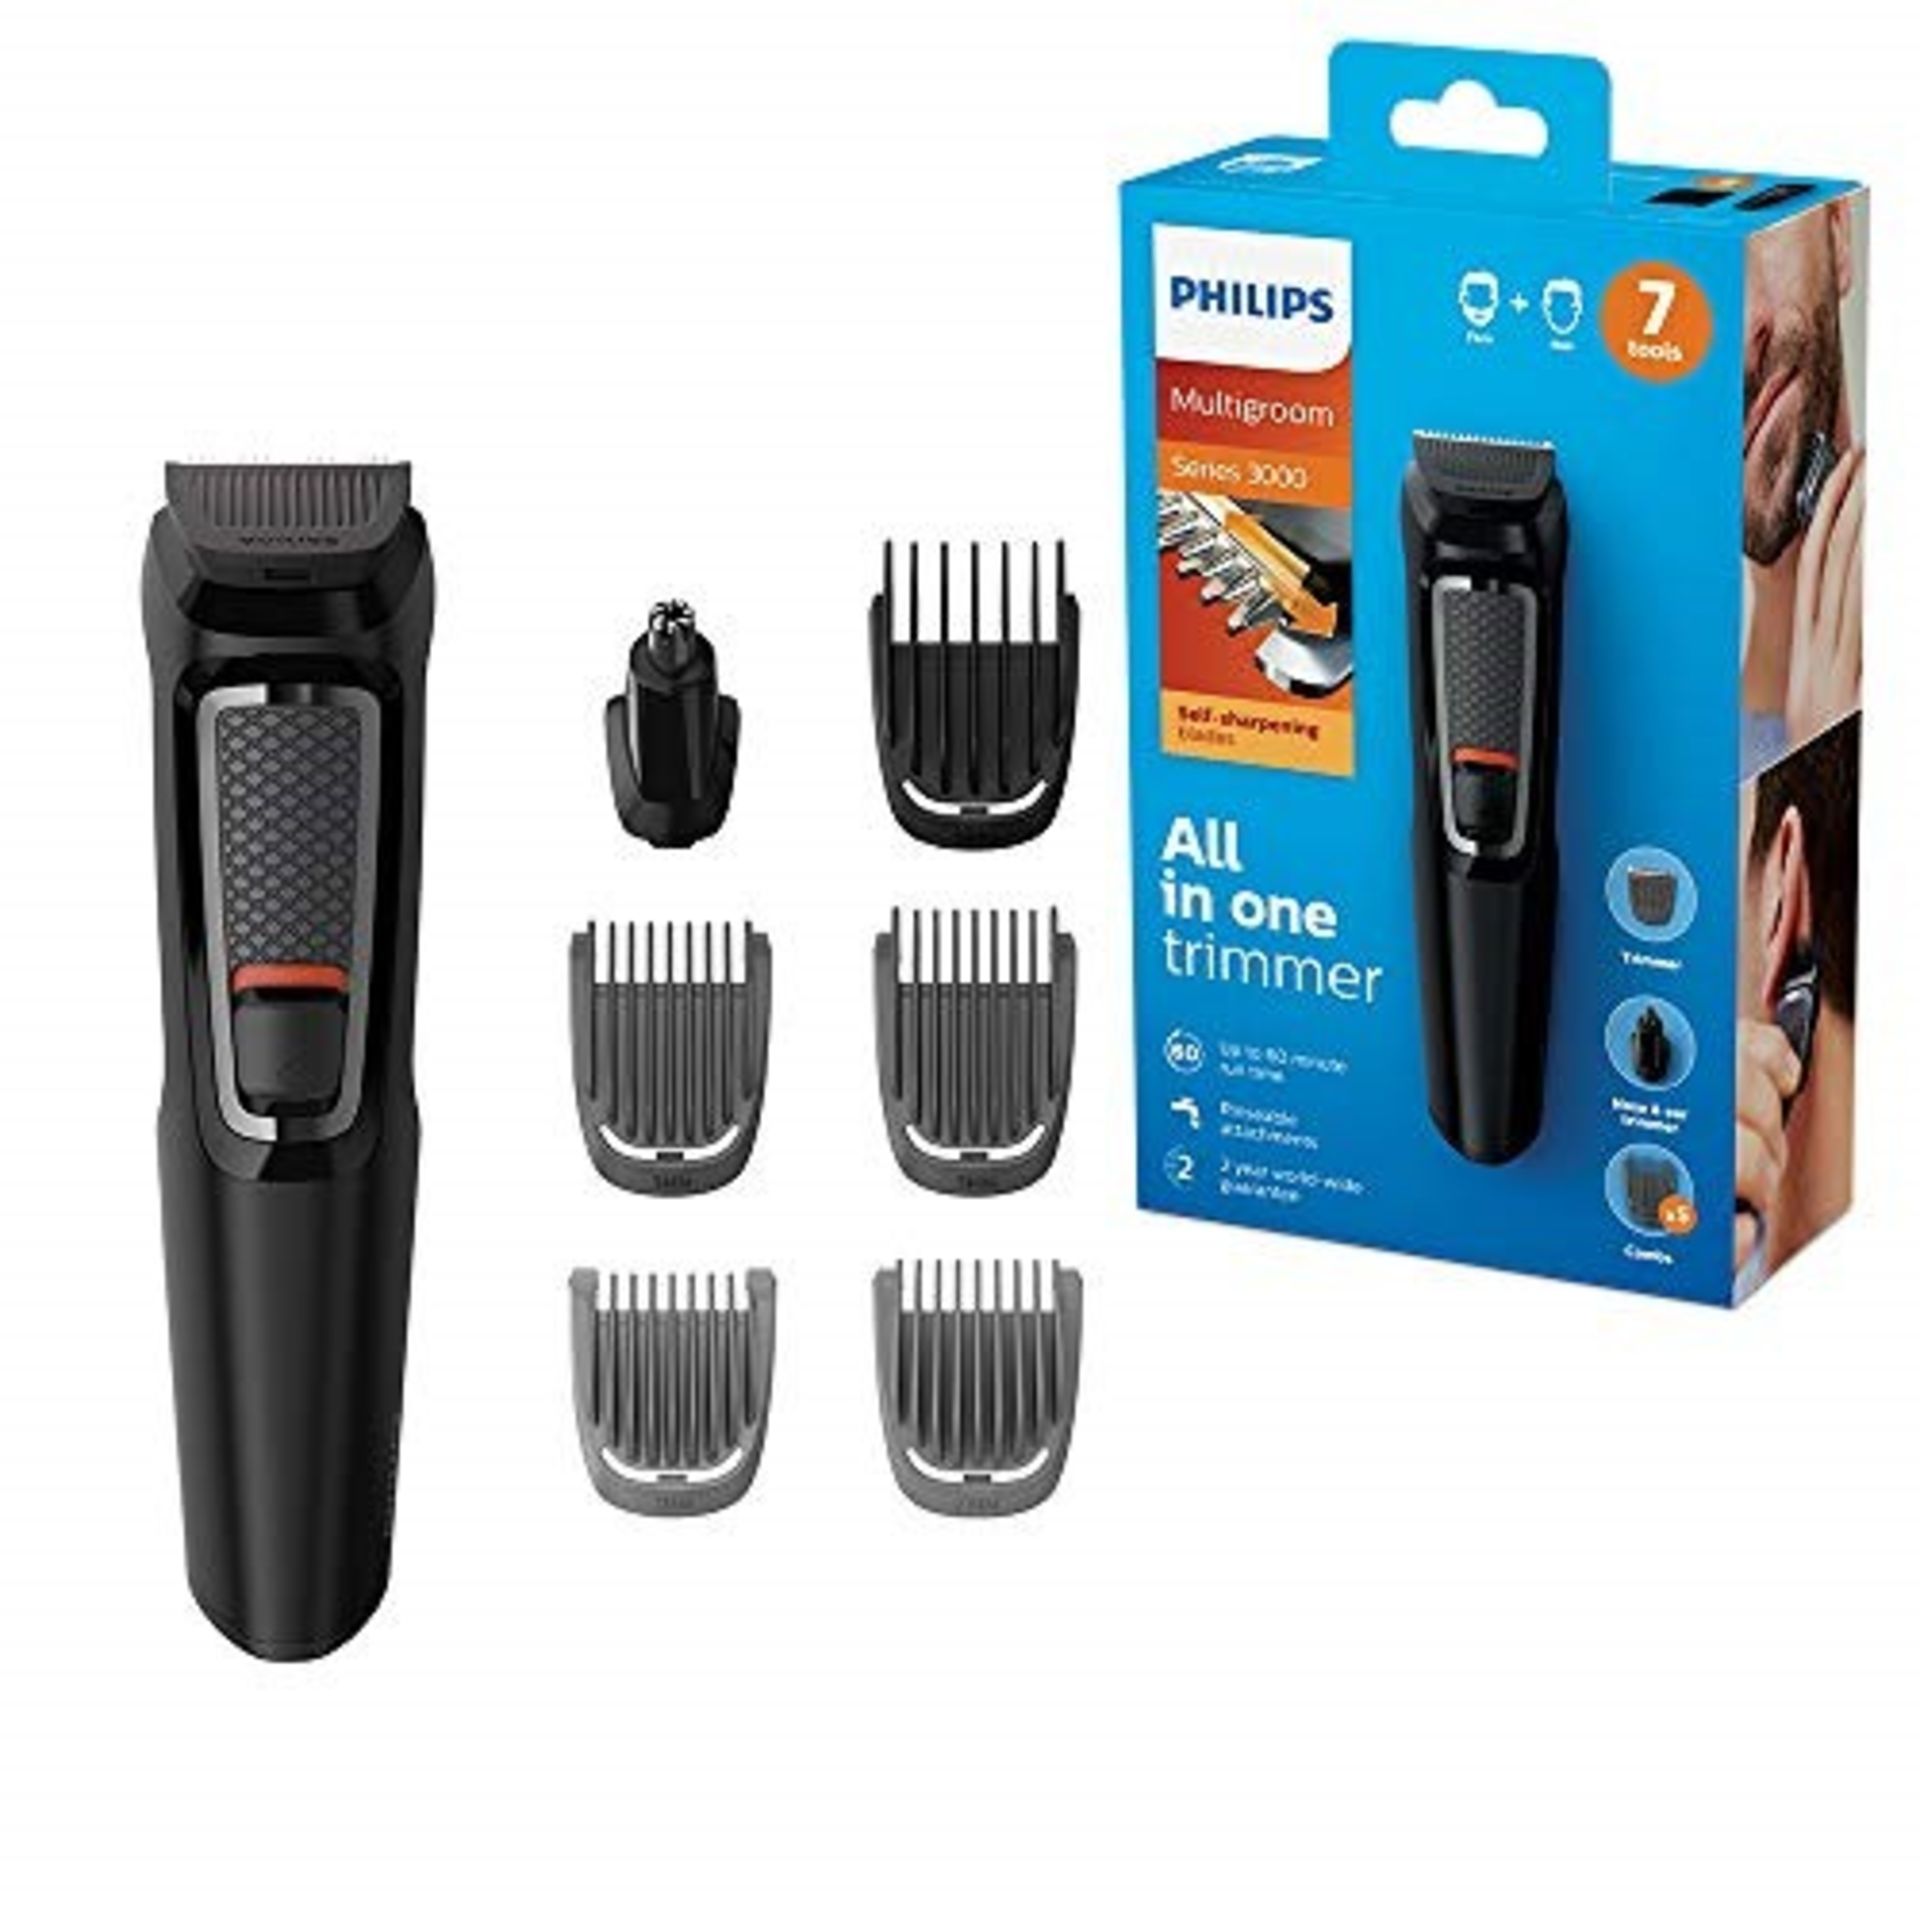 Philips 7-in-1 All-In-One Trimmer, Series 3000 Grooming Kit, Beard Trimmer and Hair Cl